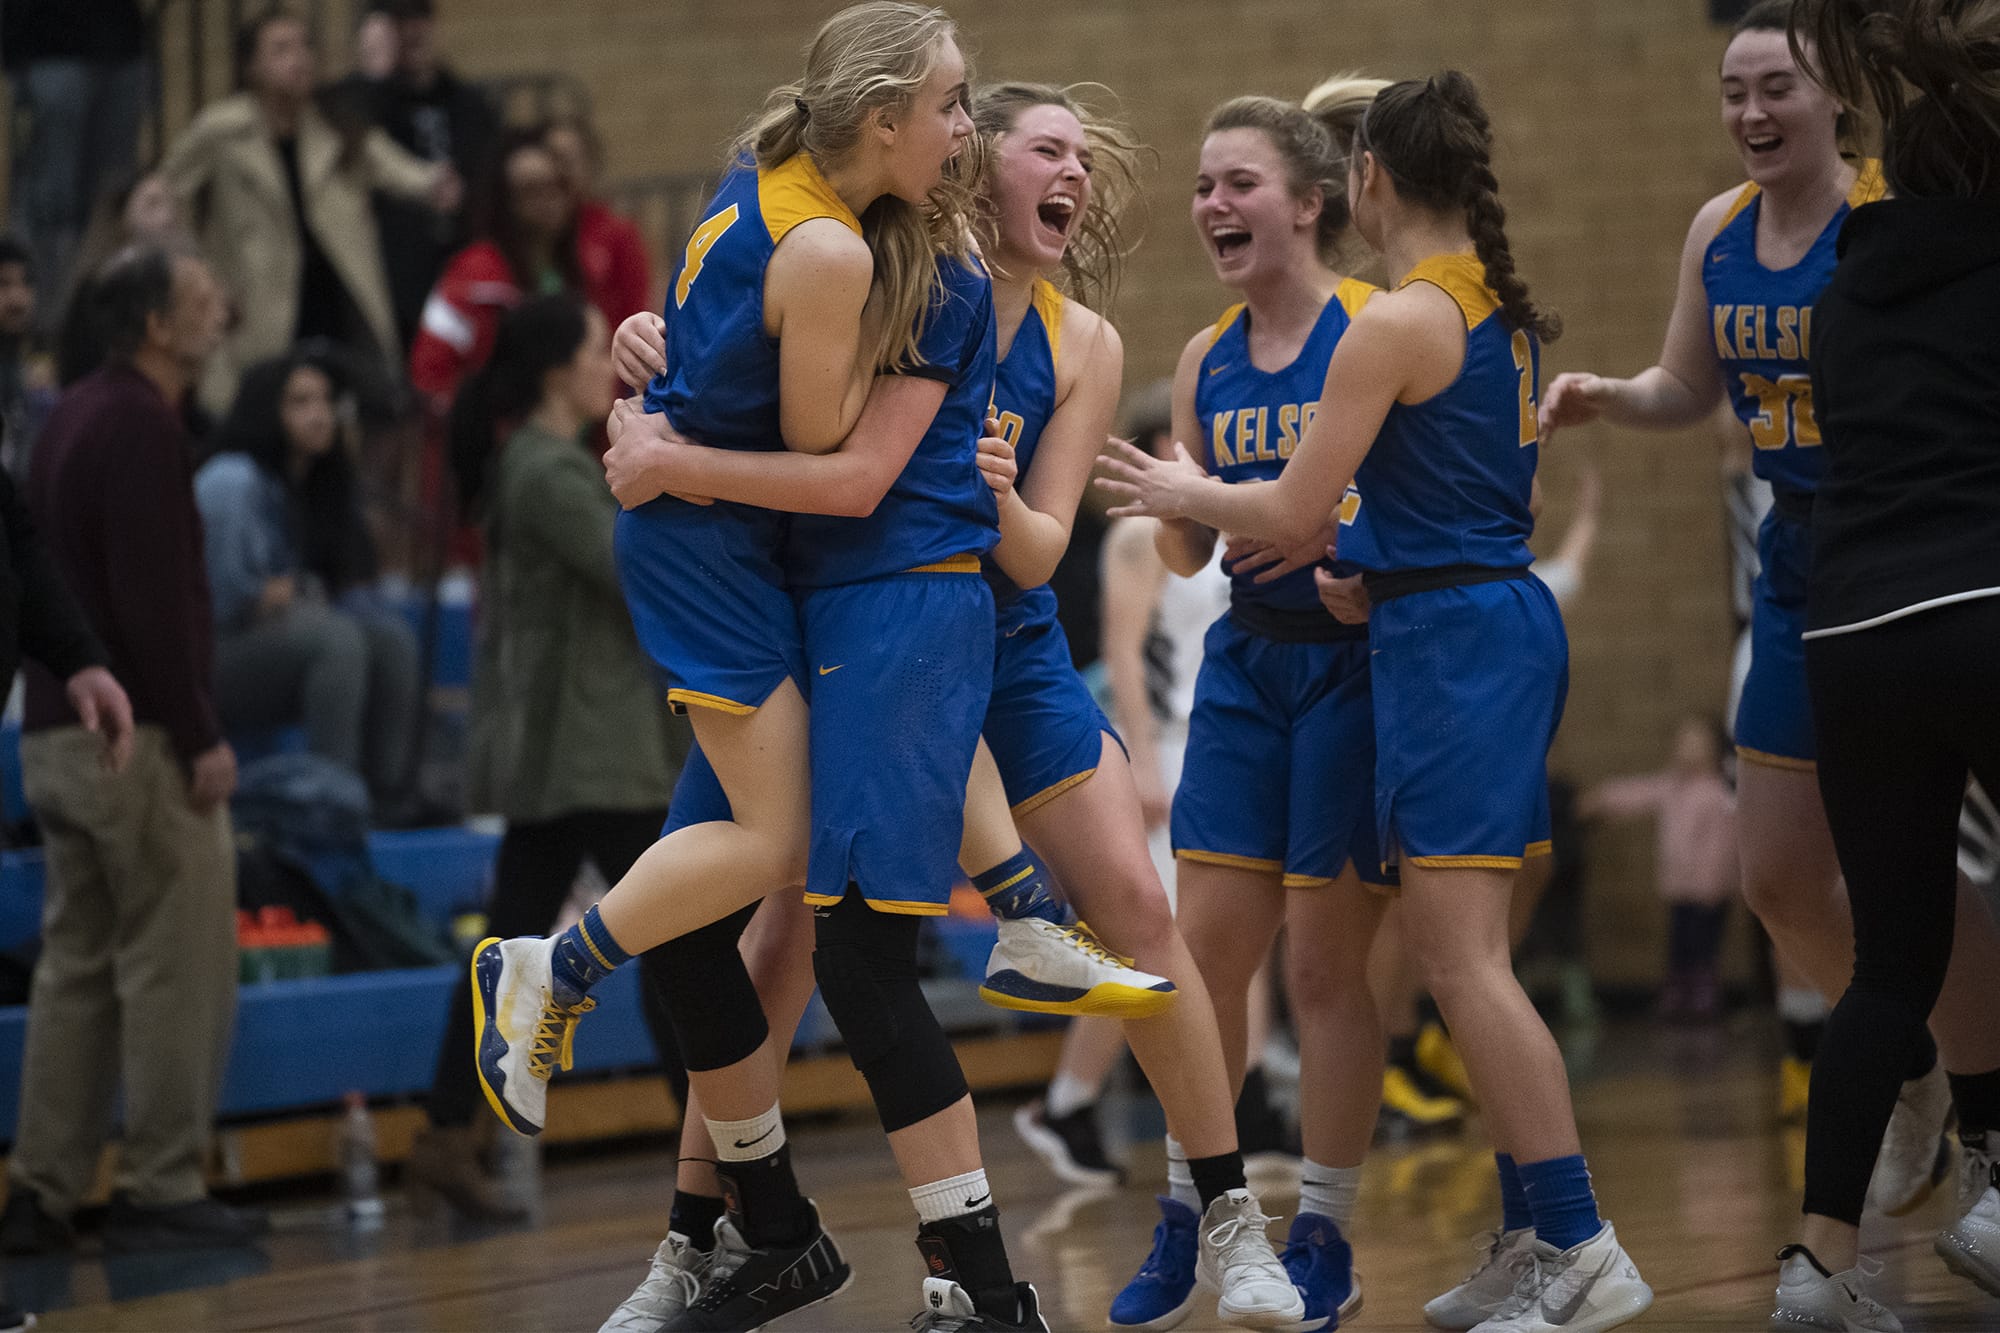 Kelso celebrates their win over Hudson’s Bay during a game at Mountain View High School on Friday night, Feb. 7, 2020.